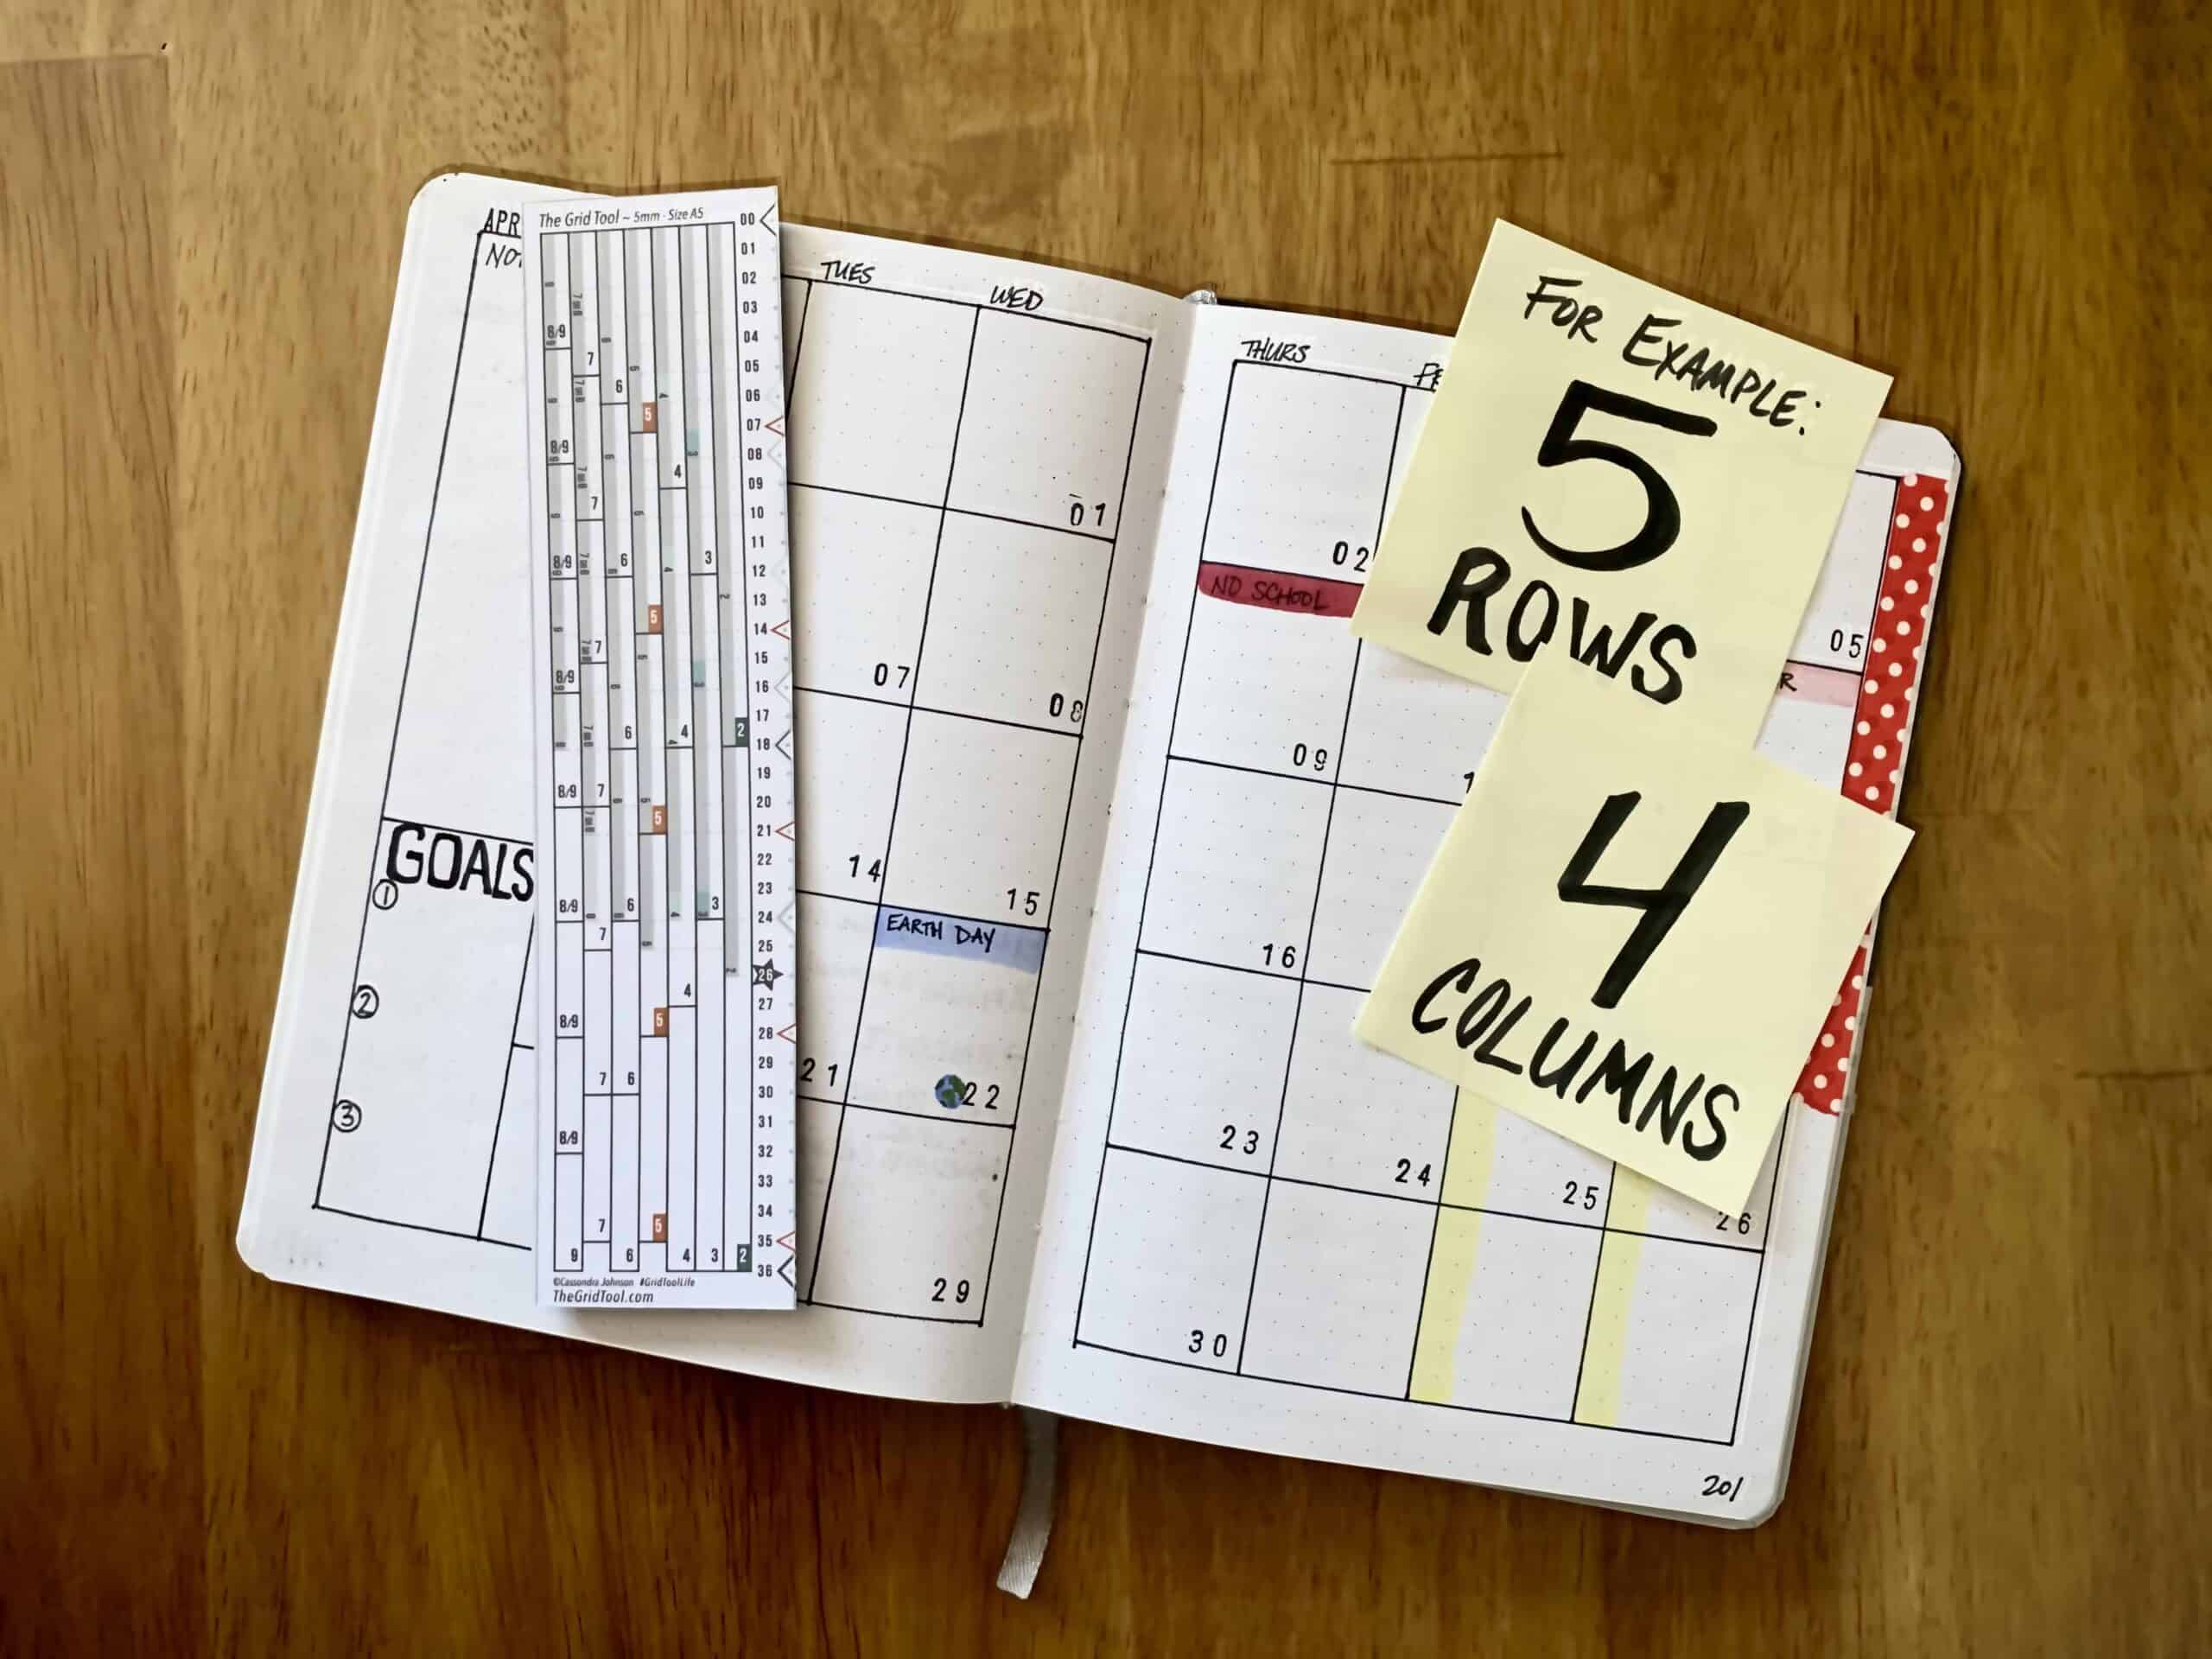 Choosing a Dot Grid Journal? Avoid These Mistakes : The Grid Tool